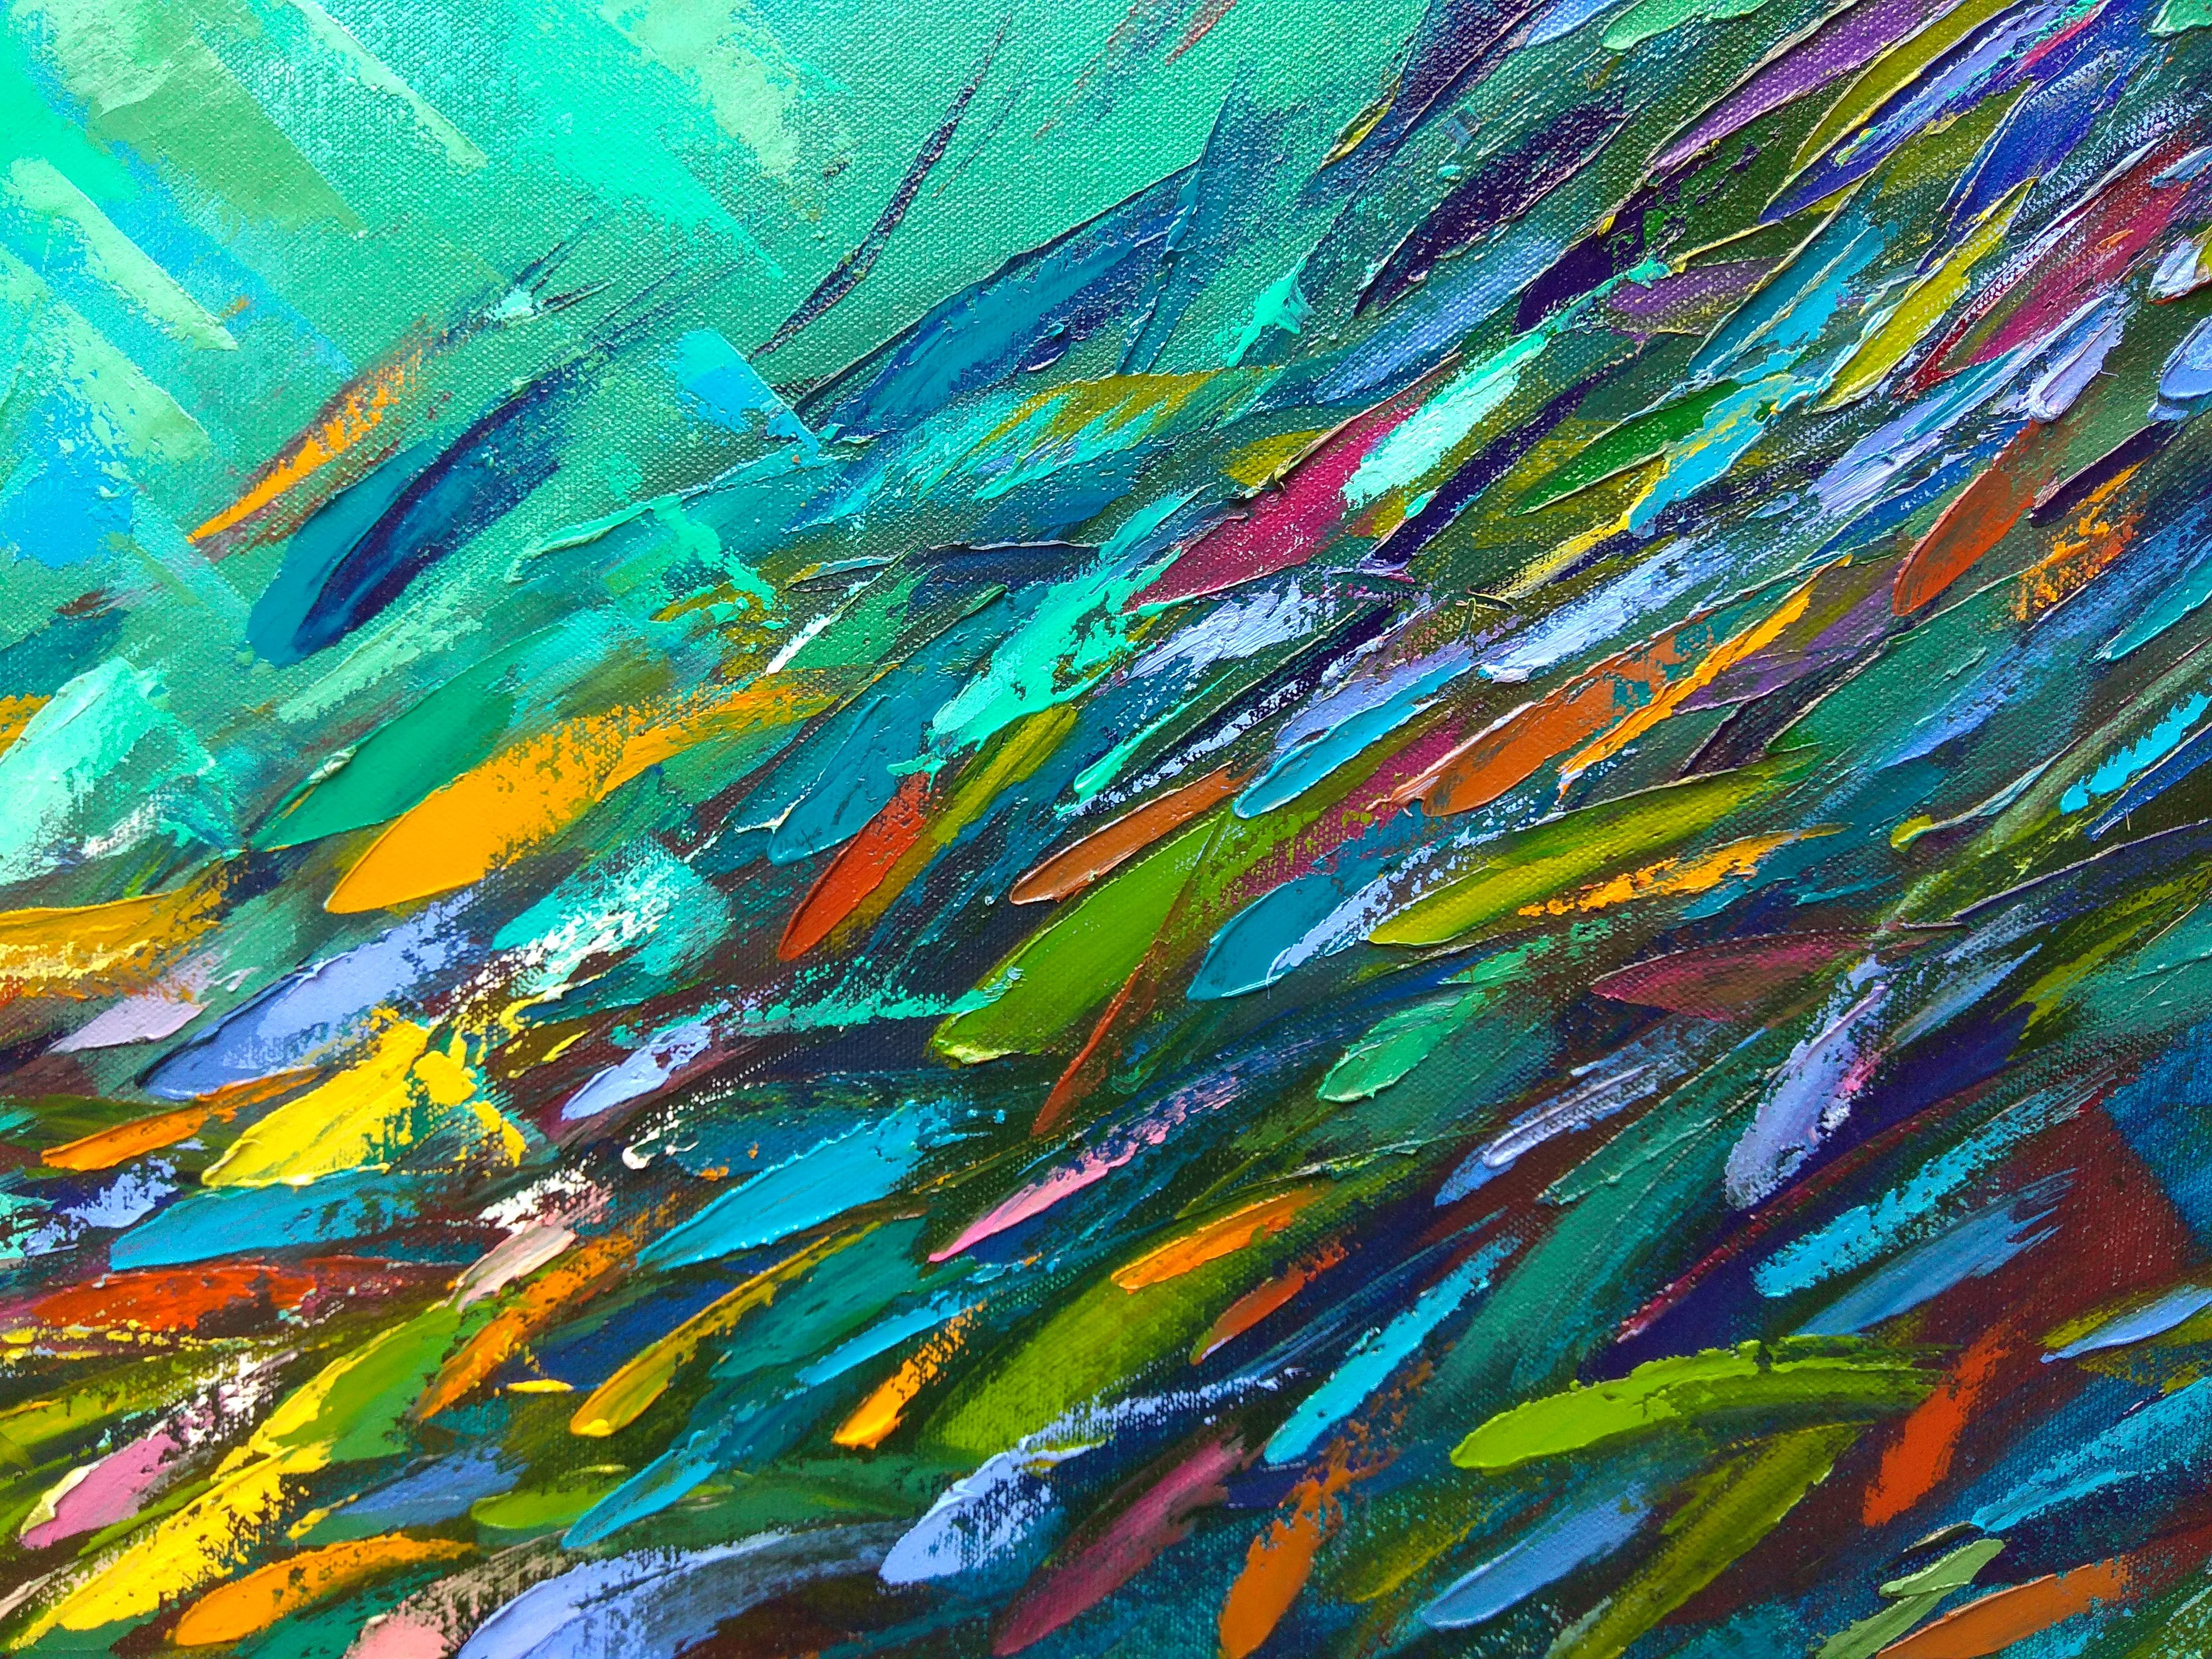 Abstract Fish Painting Seascape Ocean Art 6